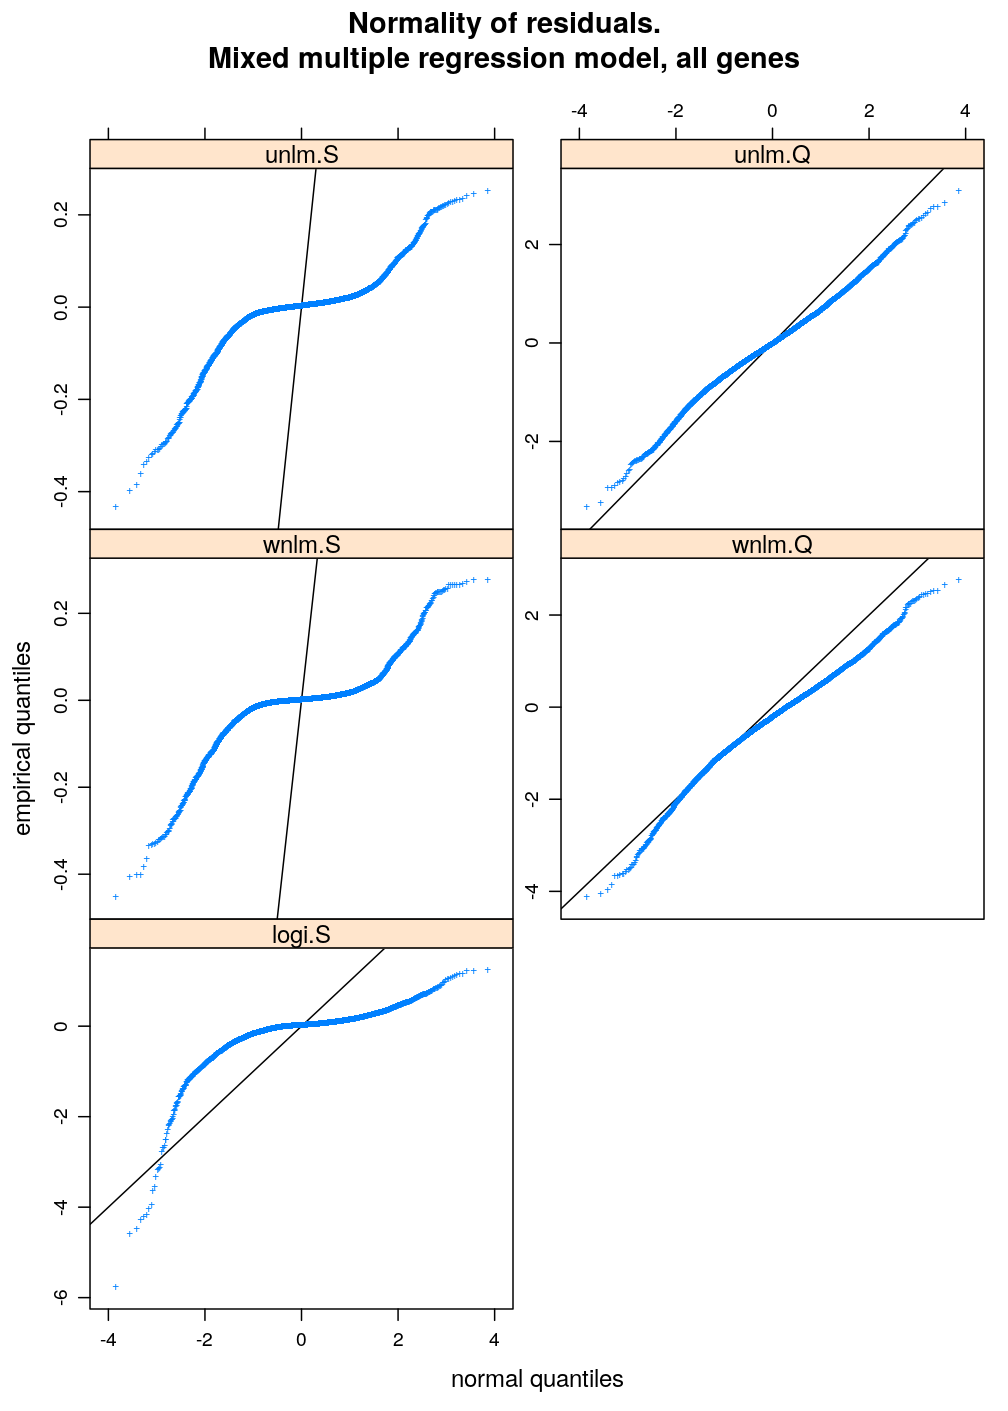 Two characteristics of fit are checked for a set of models: (1) normality of residuals and (2) homogeneity of error variance.  These are evaluated with diagnostic plots.  Among the checked models the best fitting one is unlm.Q and wnlm.Q regardless of the terms in the linear predictor.  However, the fit of wnlm.Q converges very slowly or fails to converge especially when more terms are present in the linear predictor.

